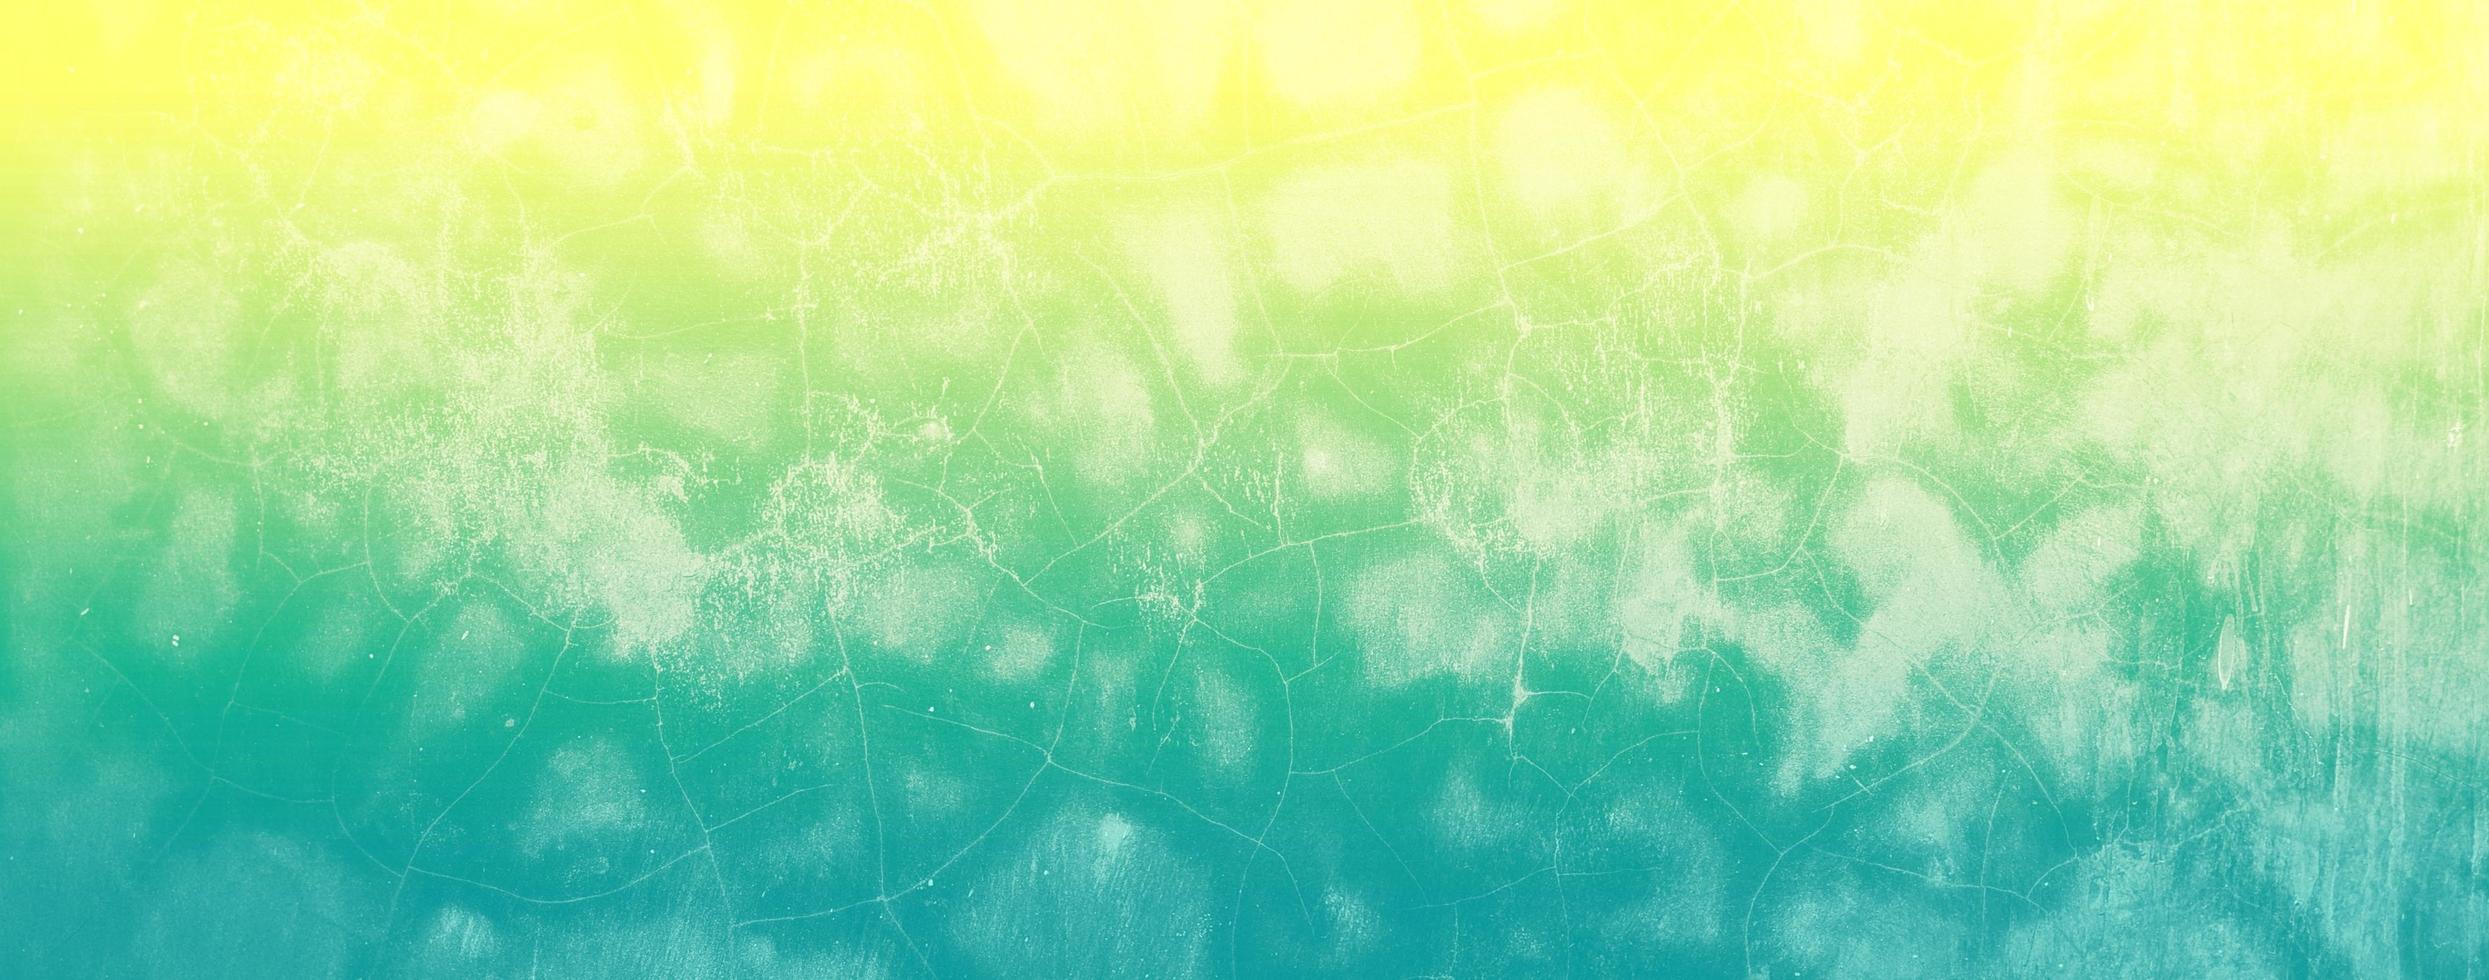 abstract texture concrete background painted with gradient pastel color photo